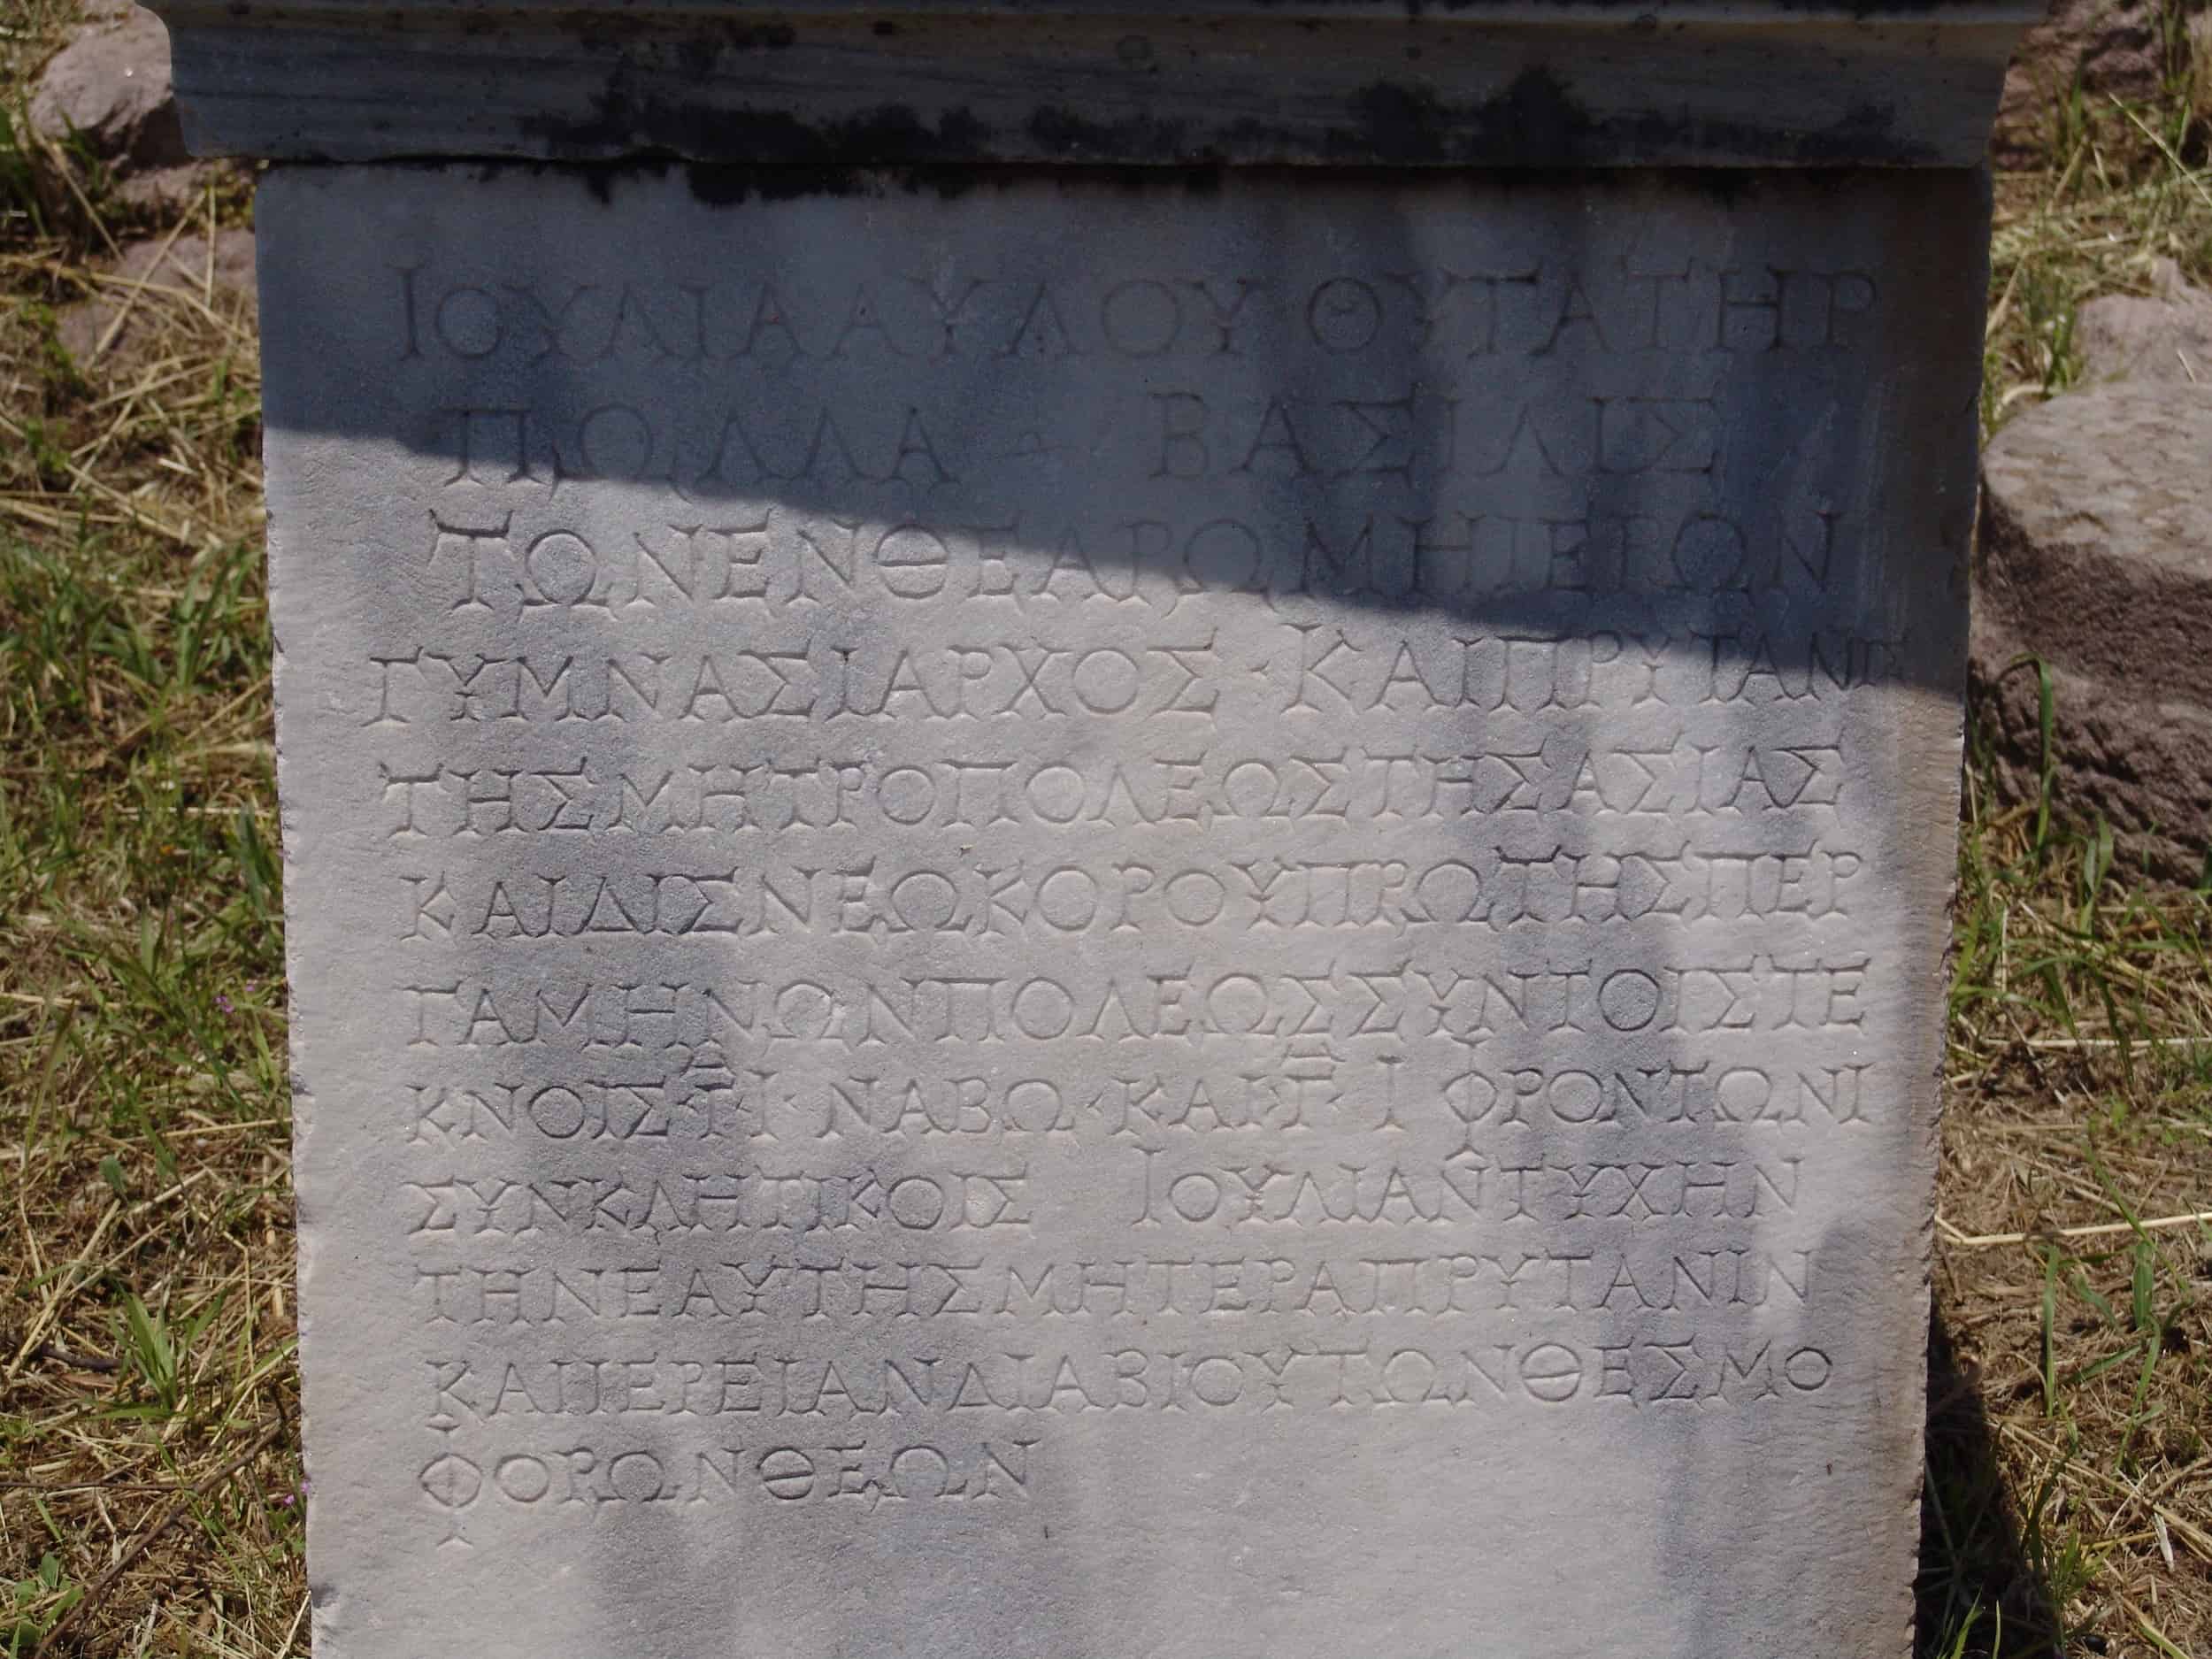 Honorary inscription in Greek at the Sanctuary of Demeter